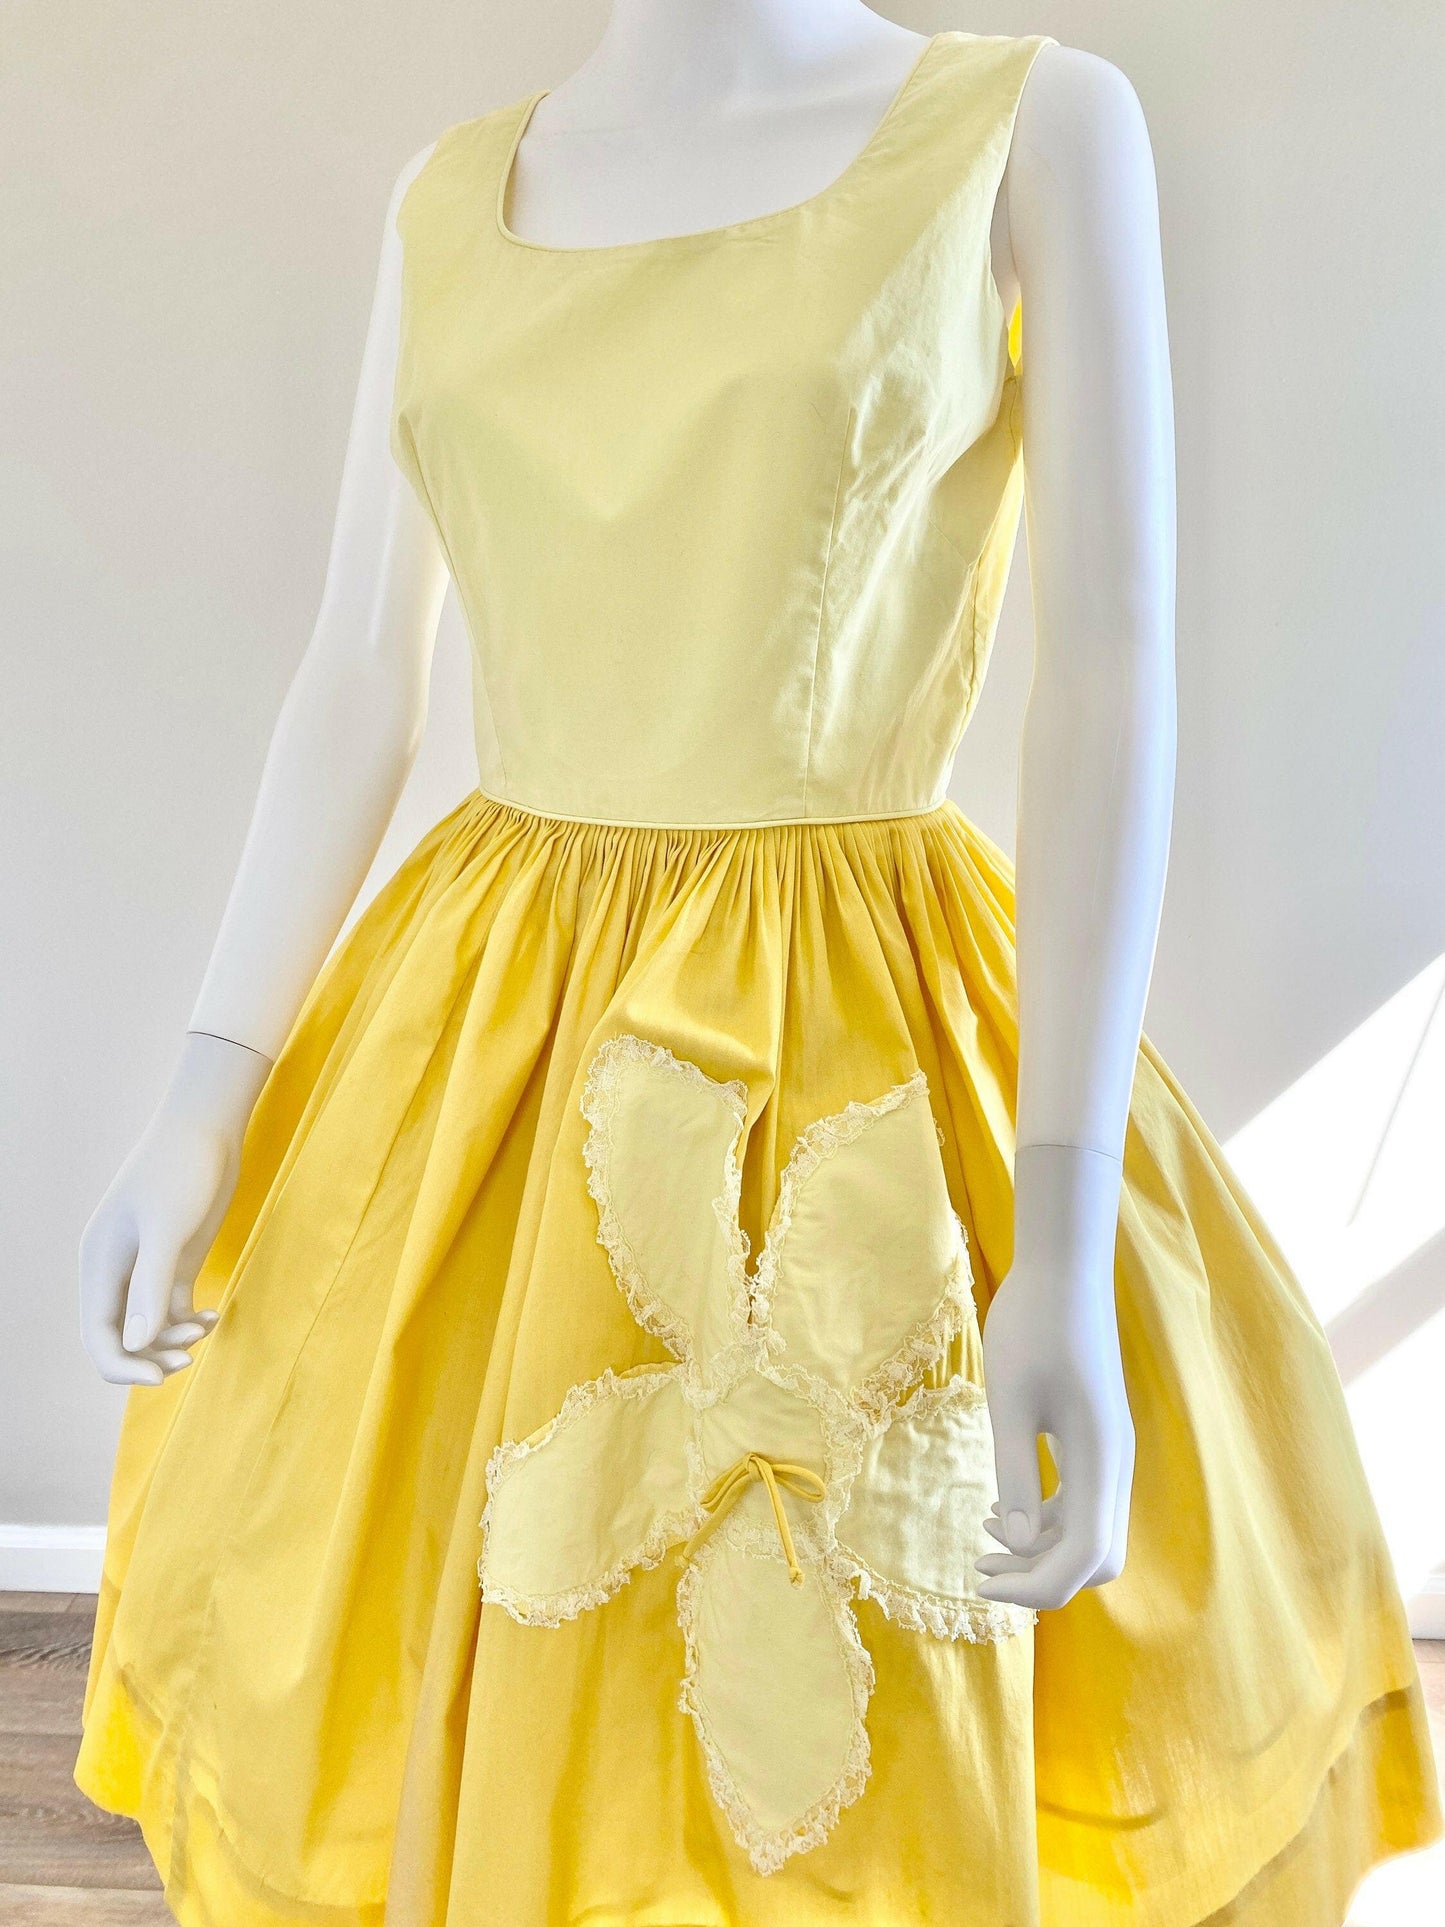 Vintage 1950s Yellow Cotton Sundress / 50s retro fit and flare full day dress / Size S